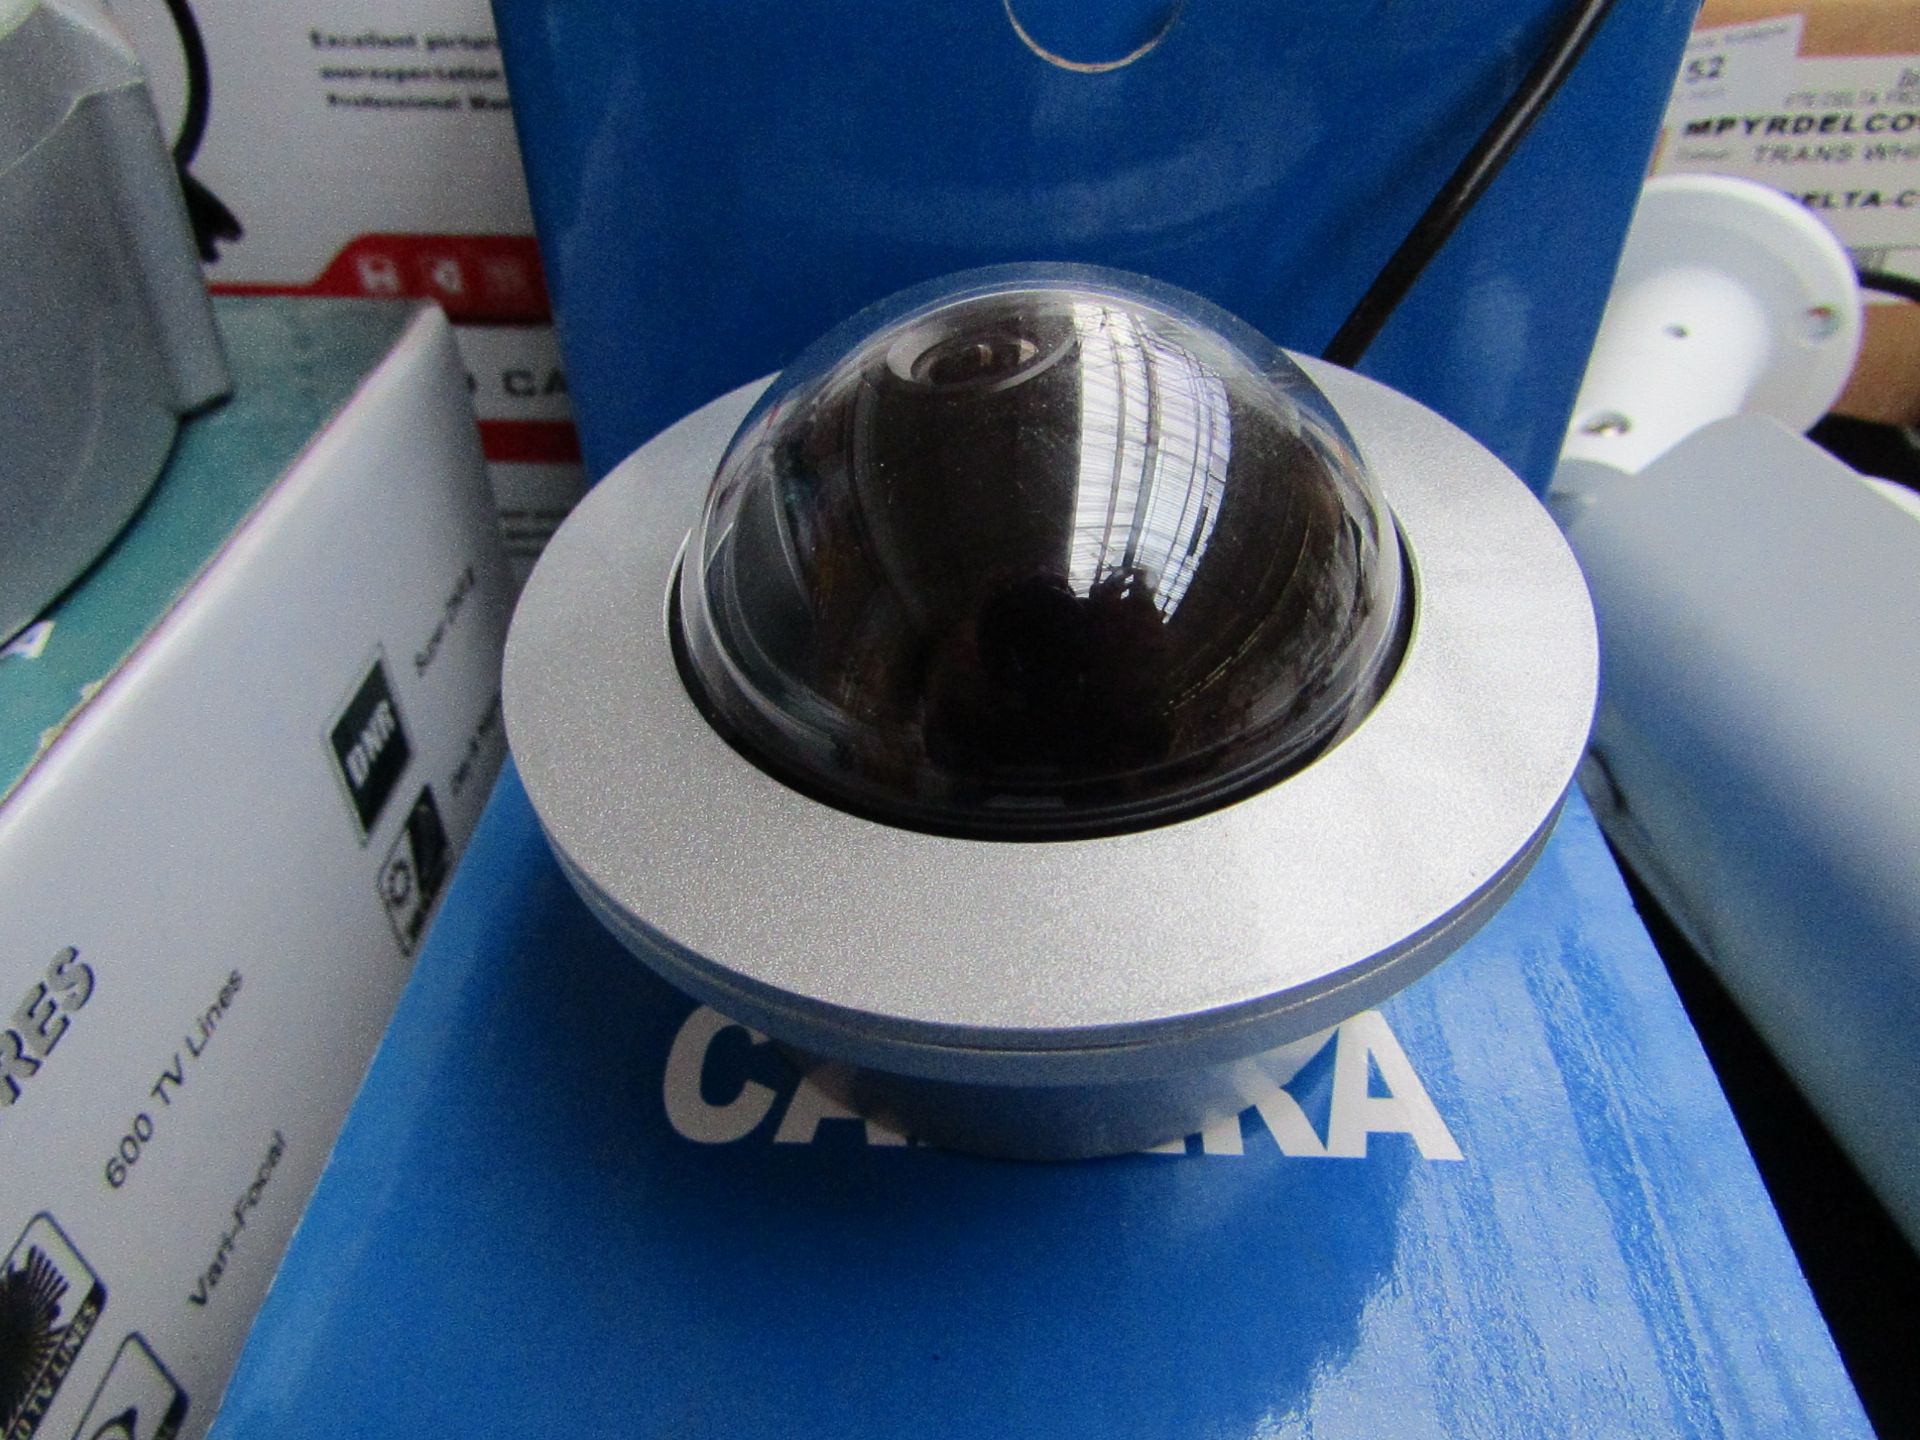 CCD - Vandalproof Dome Camera - Untested & Boxed.